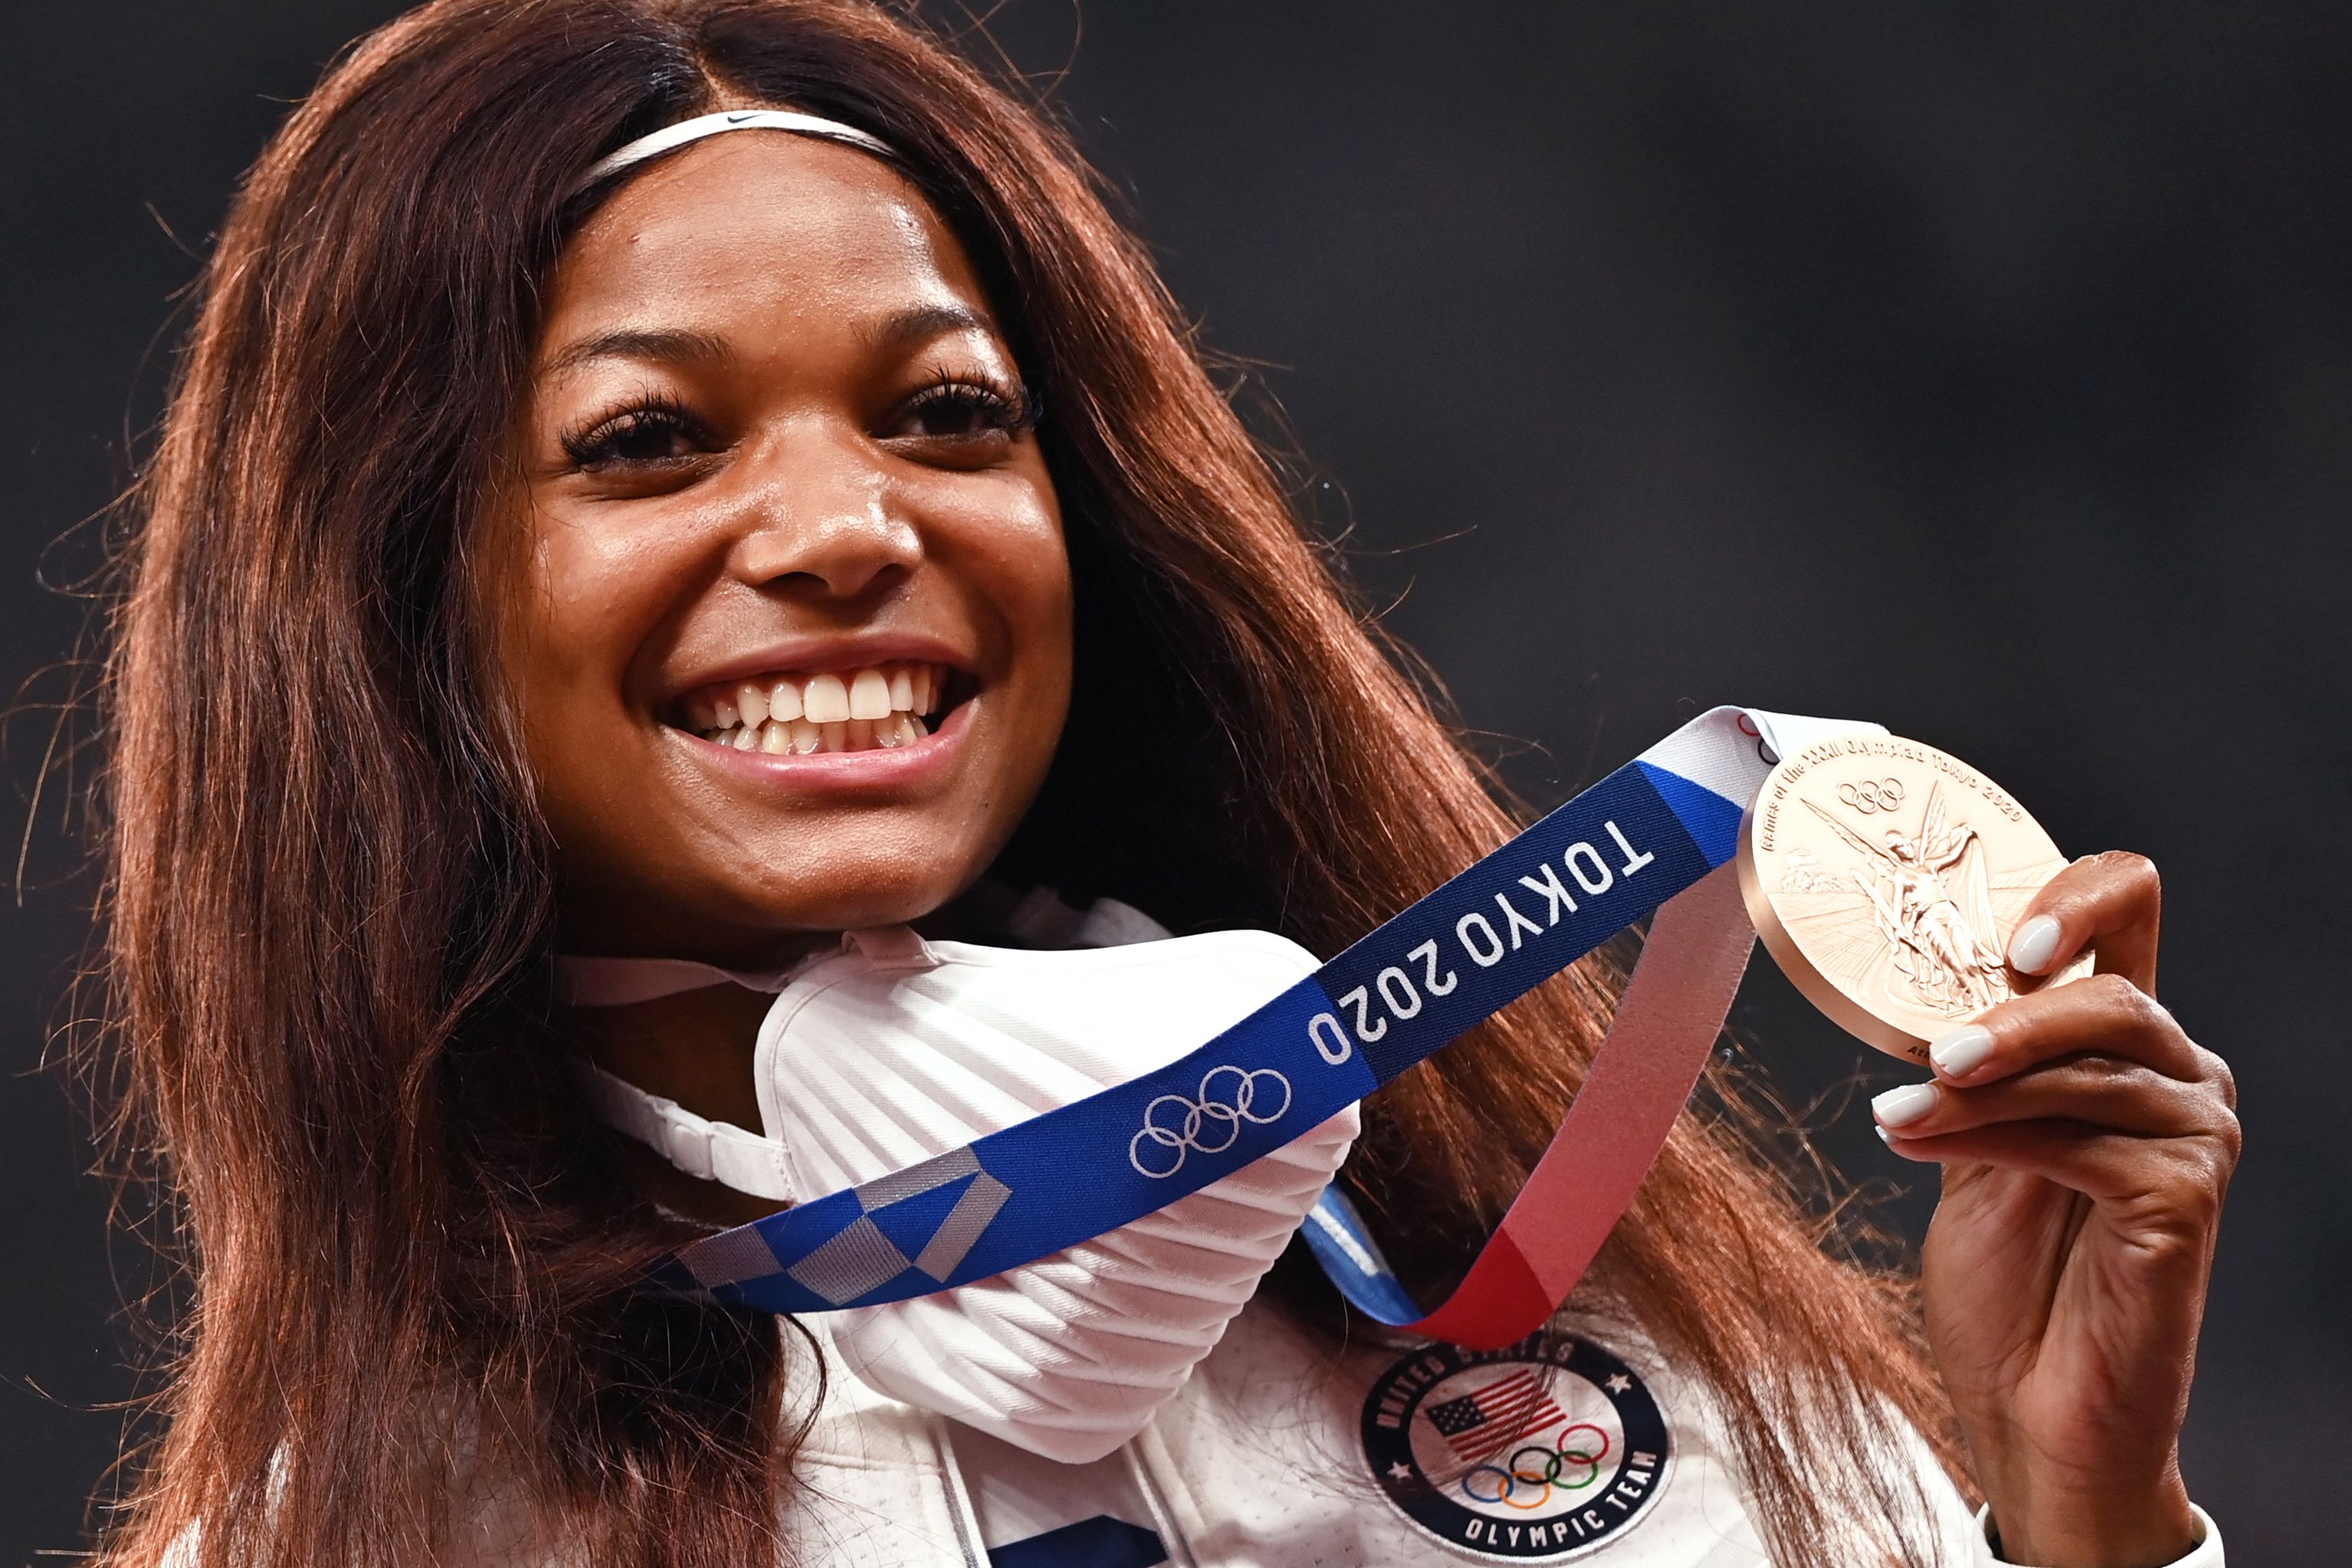 Bronze medallist Gabby Thomas celebrates during the medal ceremony for the women’s 200m event